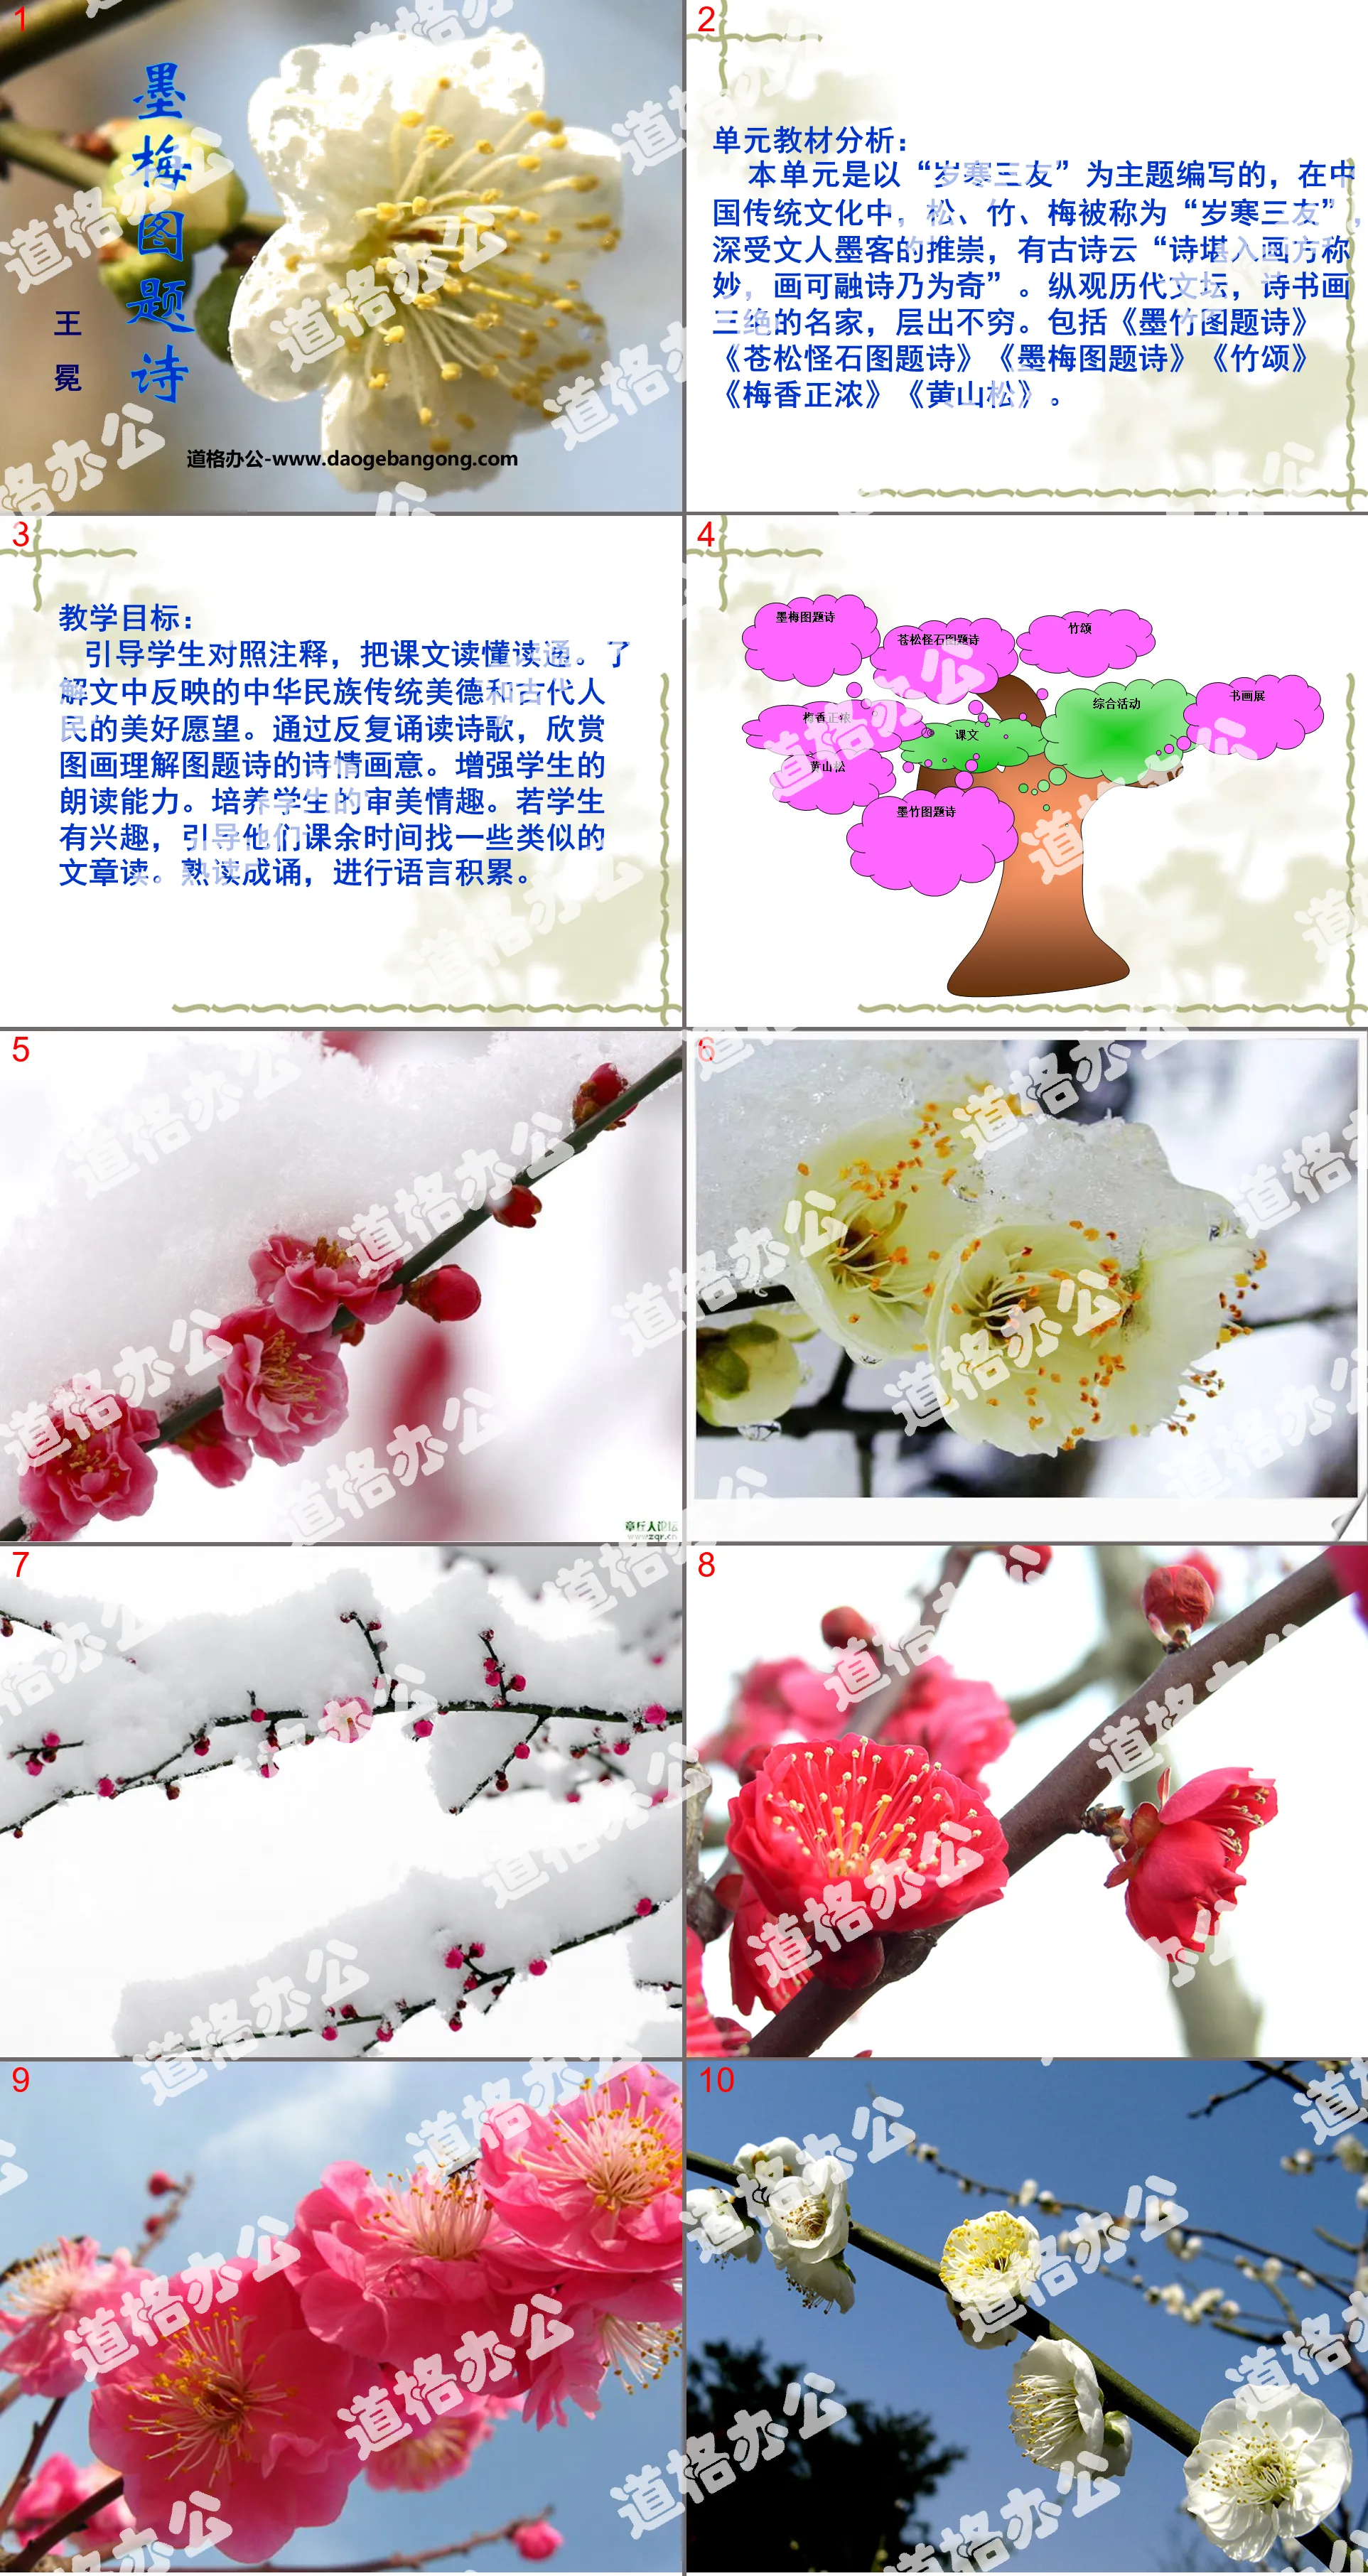 "Poetry on Plum Blossom Pictures" PPT courseware